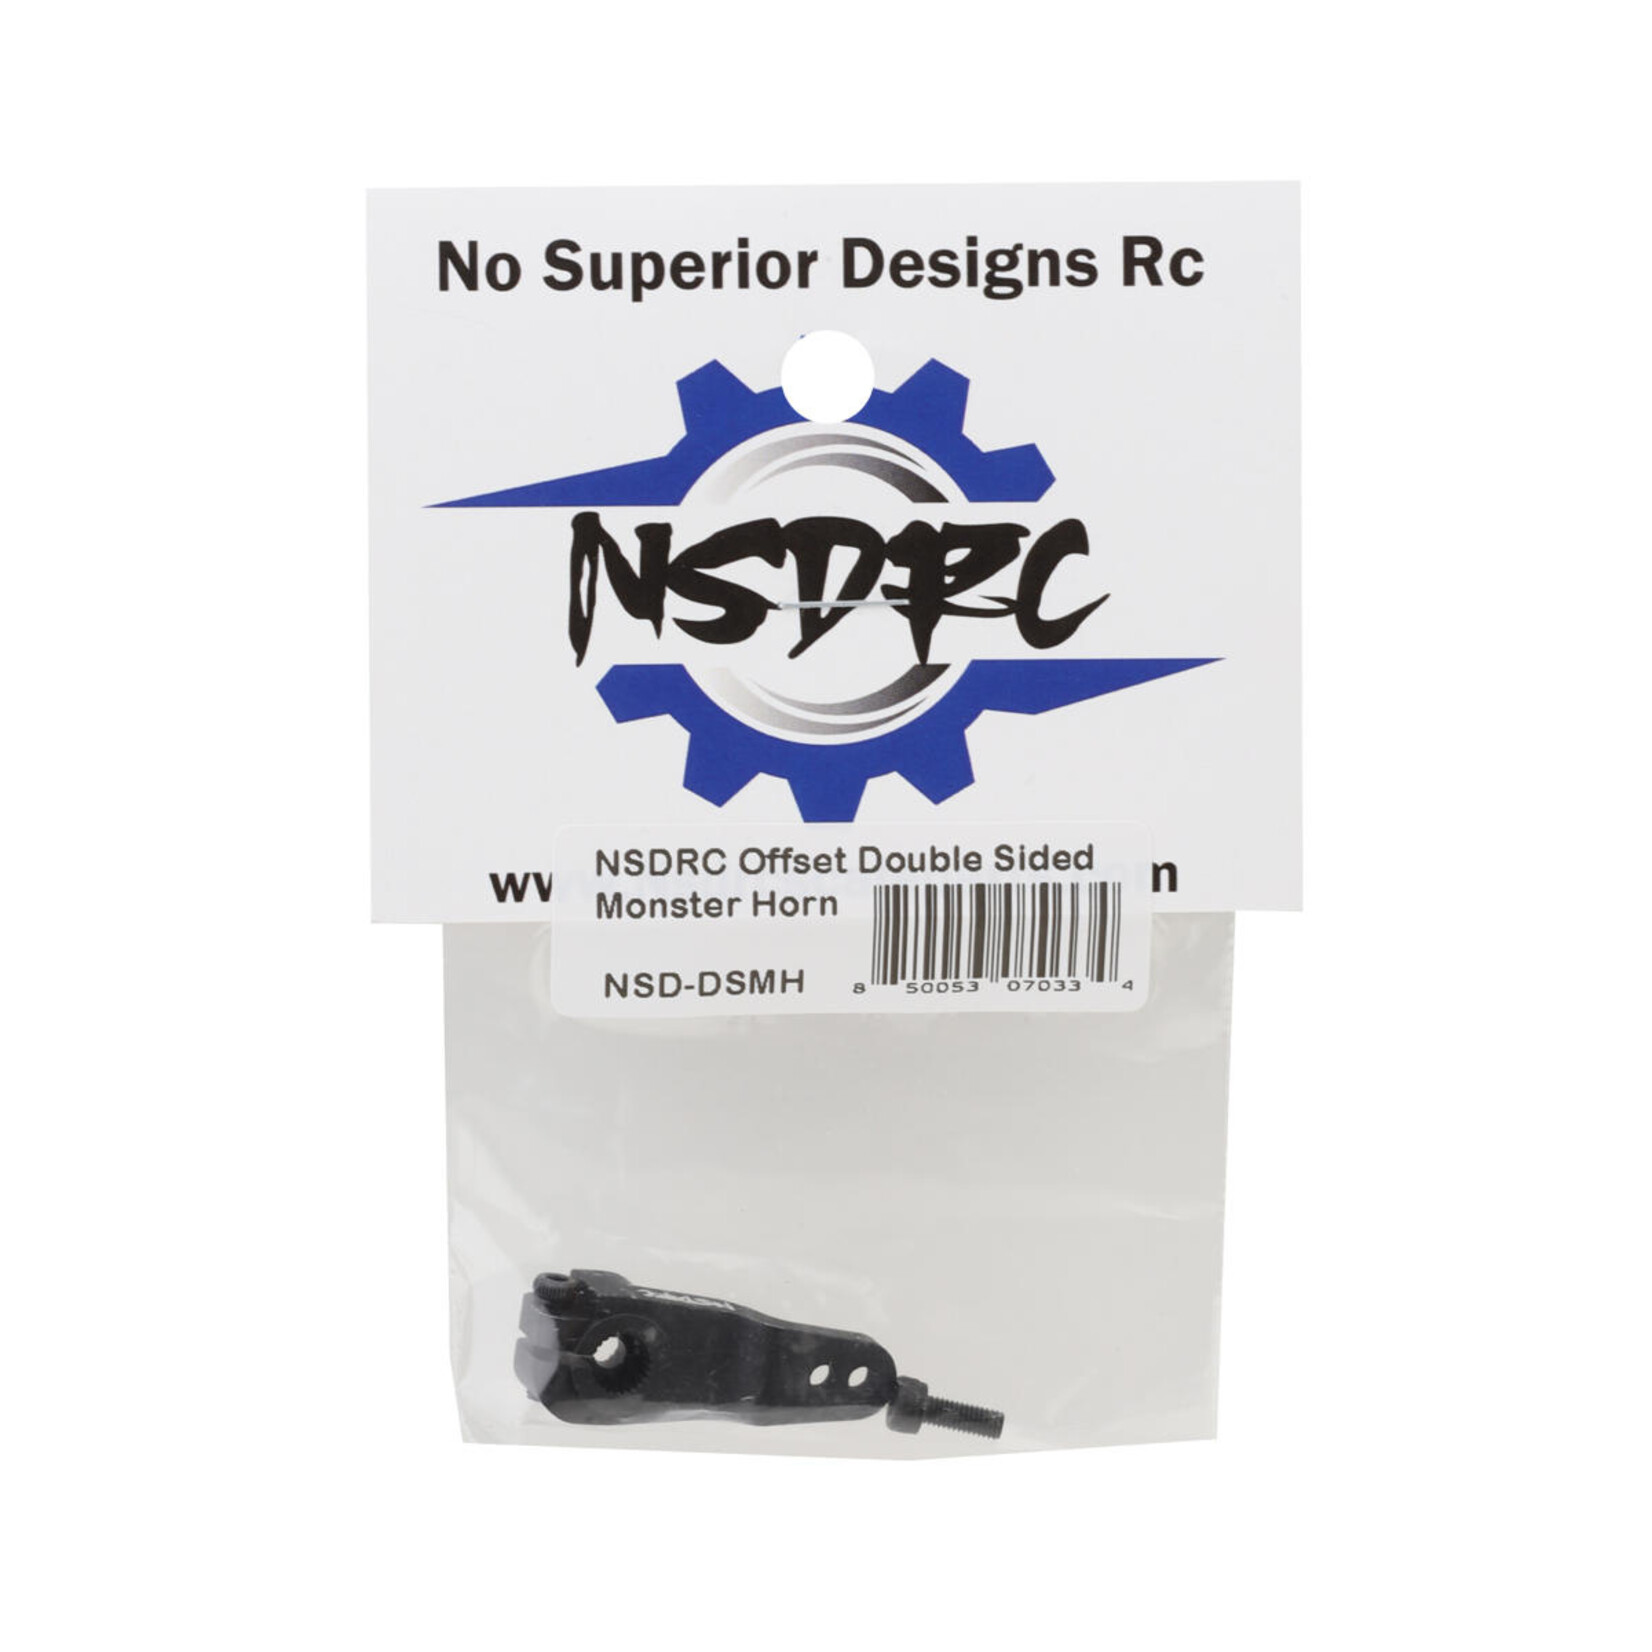 NSDRC No Superior Designs RC Offset Double Sided Monster Clamping Horn (25T) (24mm) #NSD-Offset